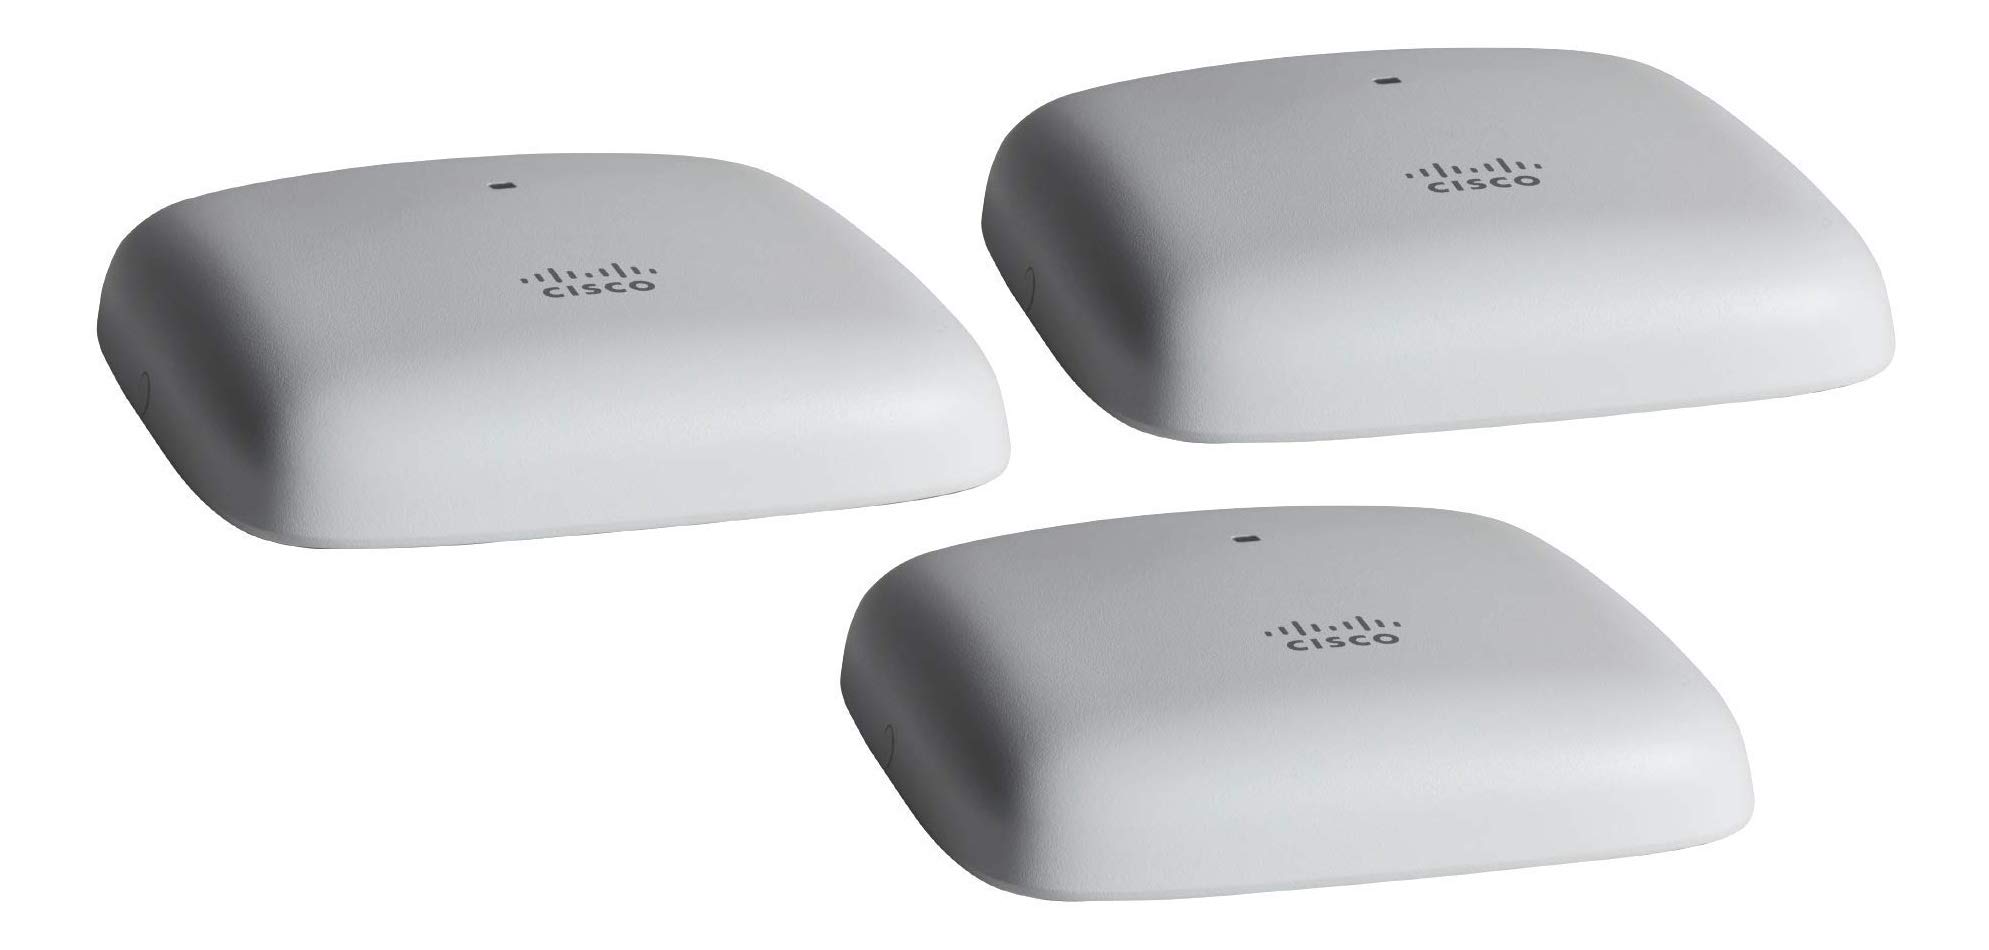 Cisco Business 140AC Wi-Fi Access Point 802.11ac 2x2 1 GbE Port Ceiling Mount3 Pack BundleLimited Lifetime Protection